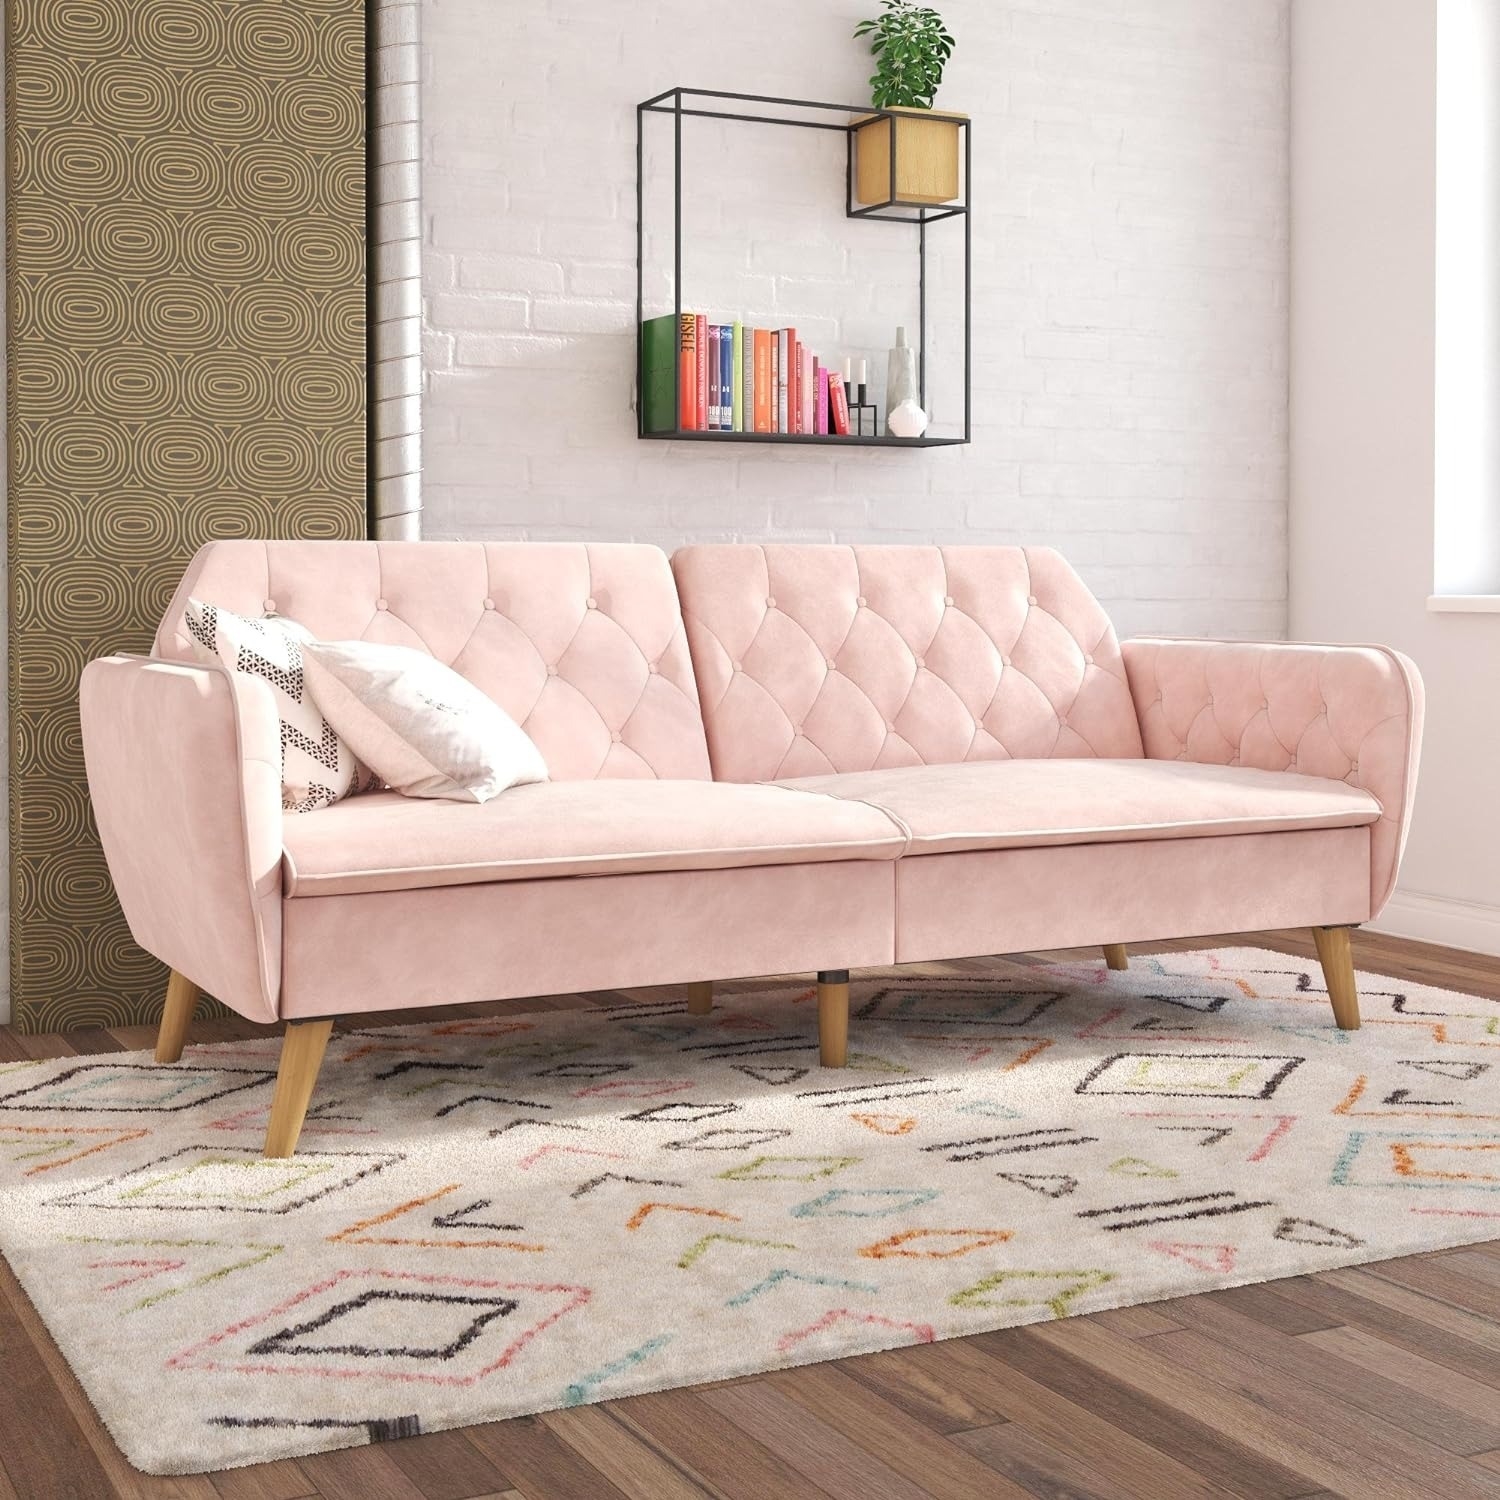 the pink couch